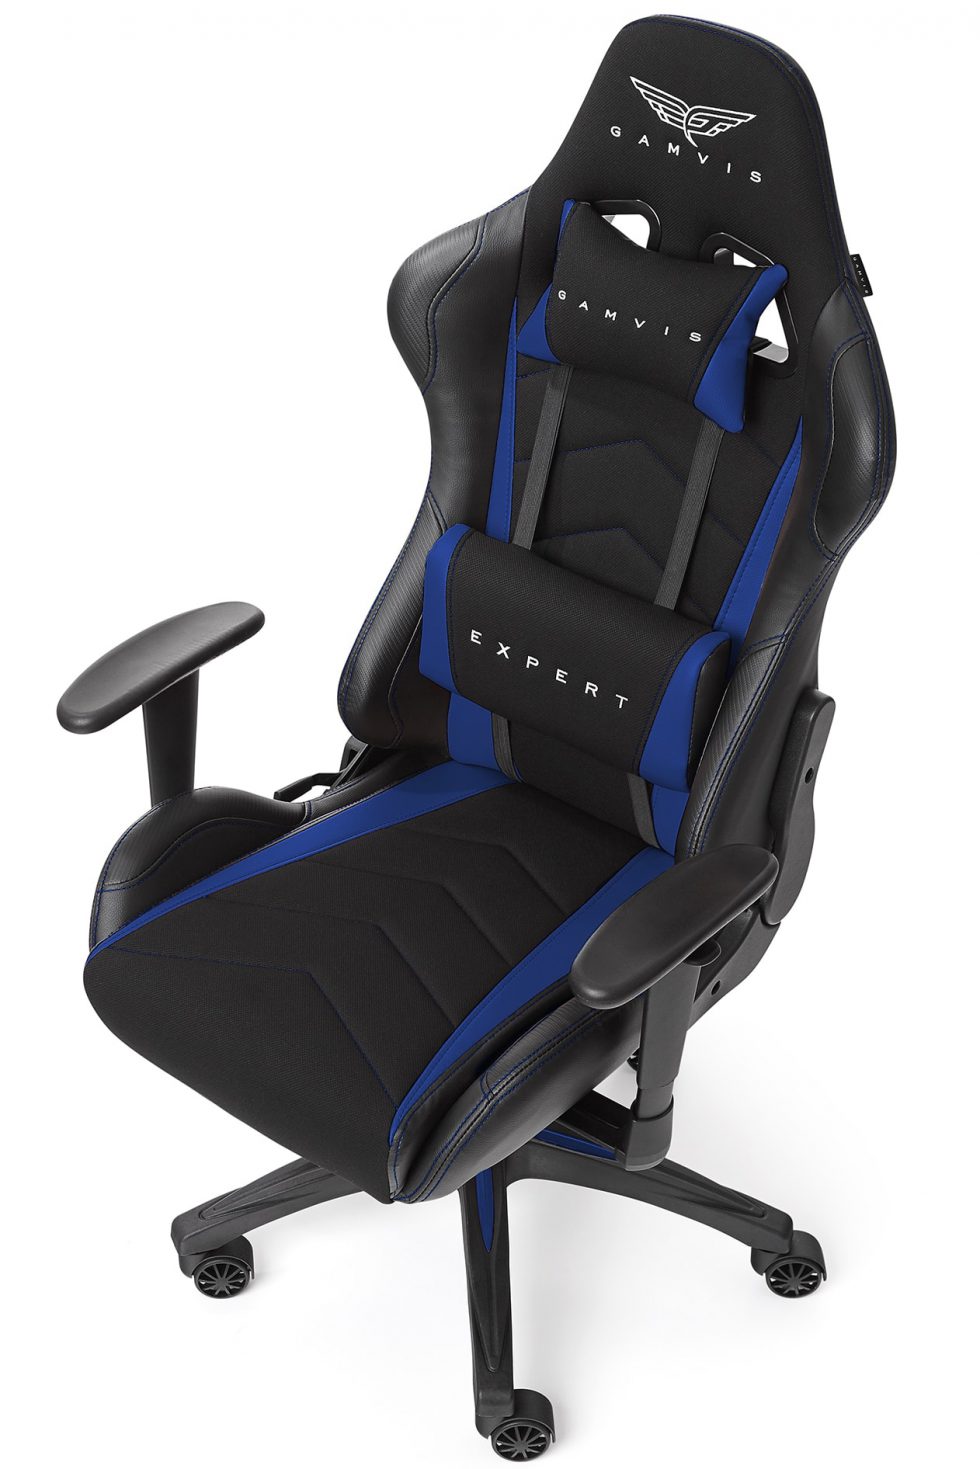 Gamvis Expert Gaming Chair Black Blue Fabric